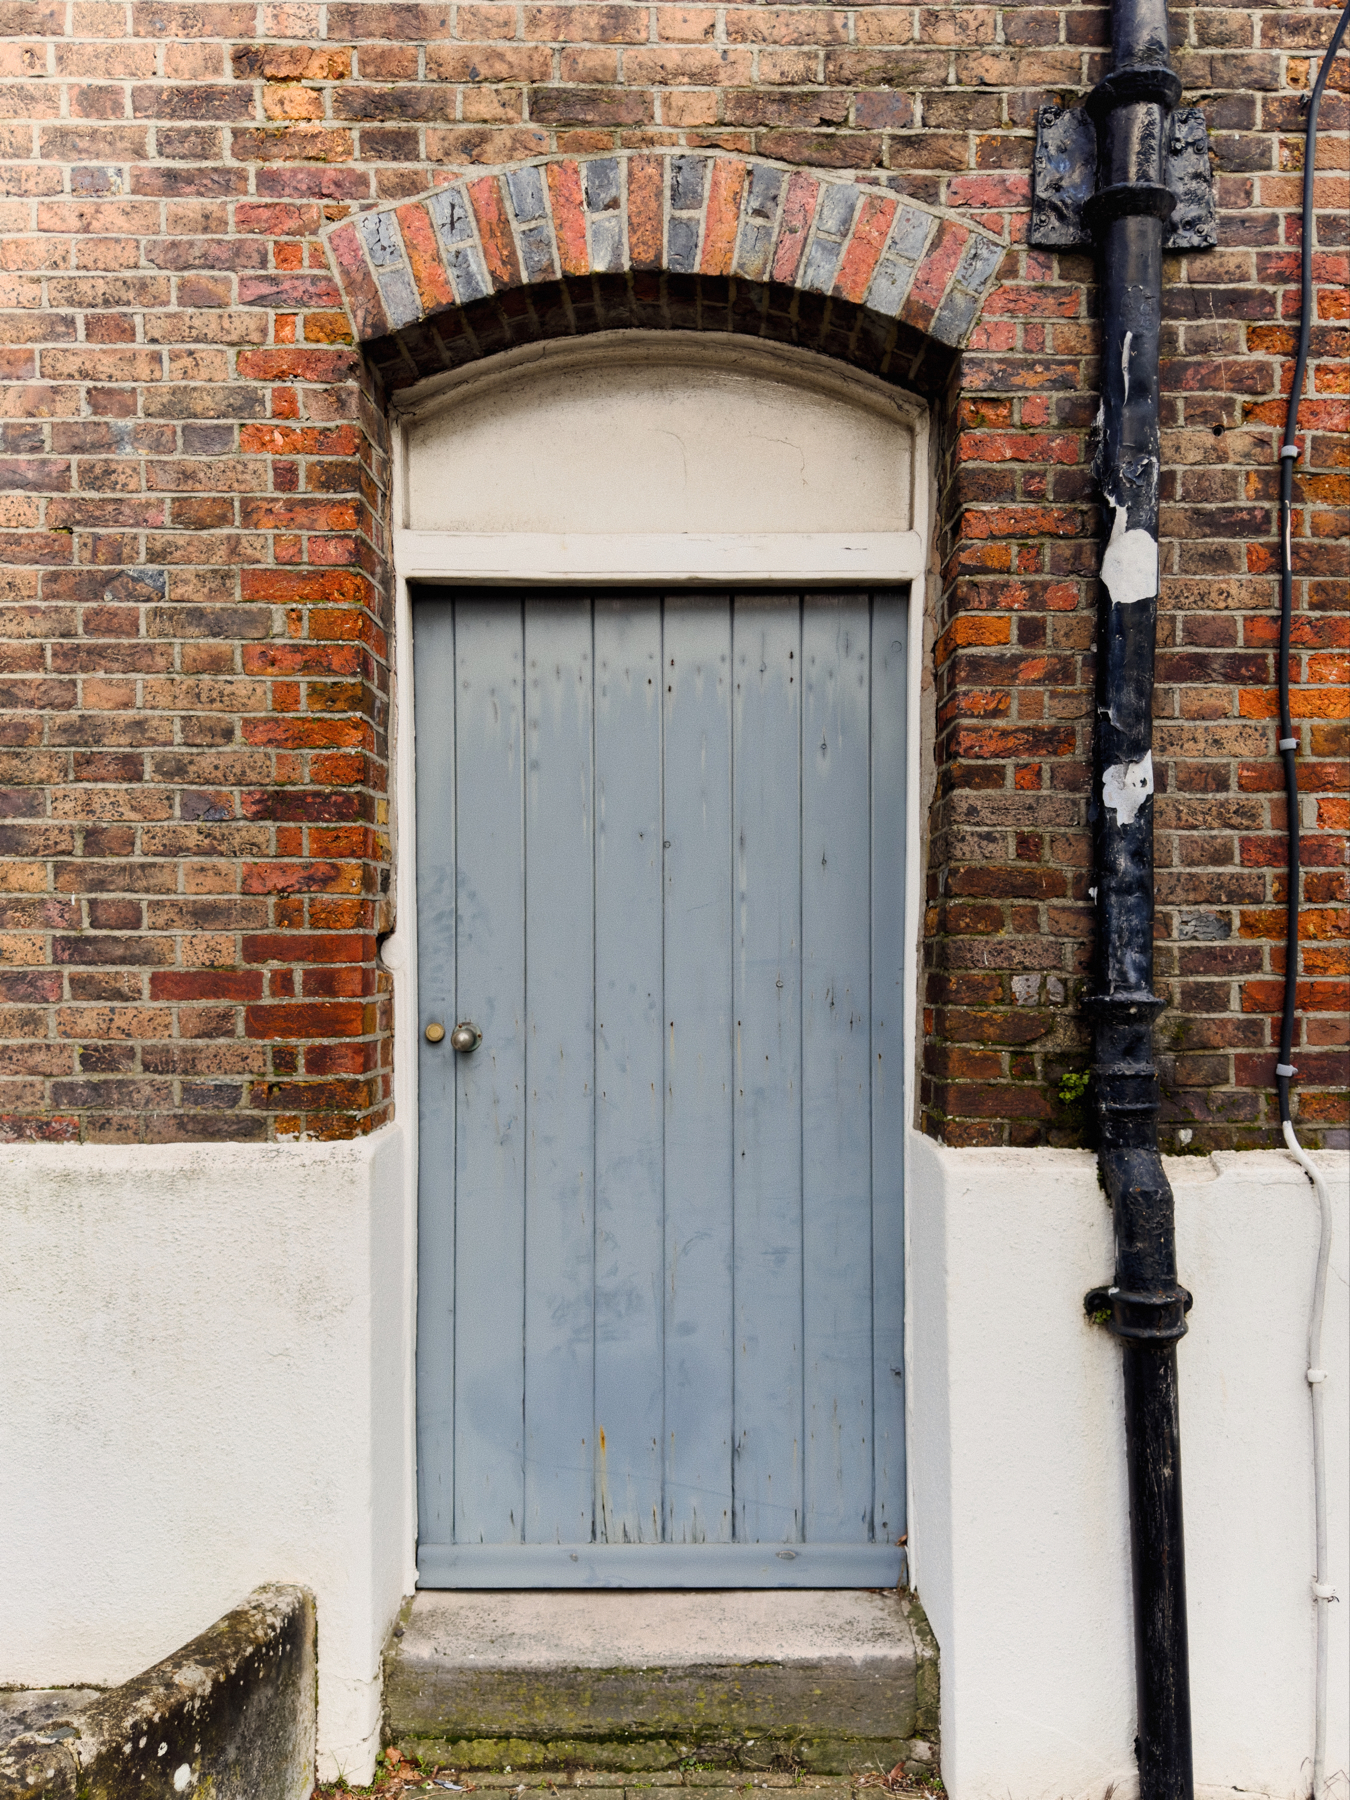 A pale blue wooden door set within a brick wall, with an arched brick lintel above and a cast iron downpipe to the right.